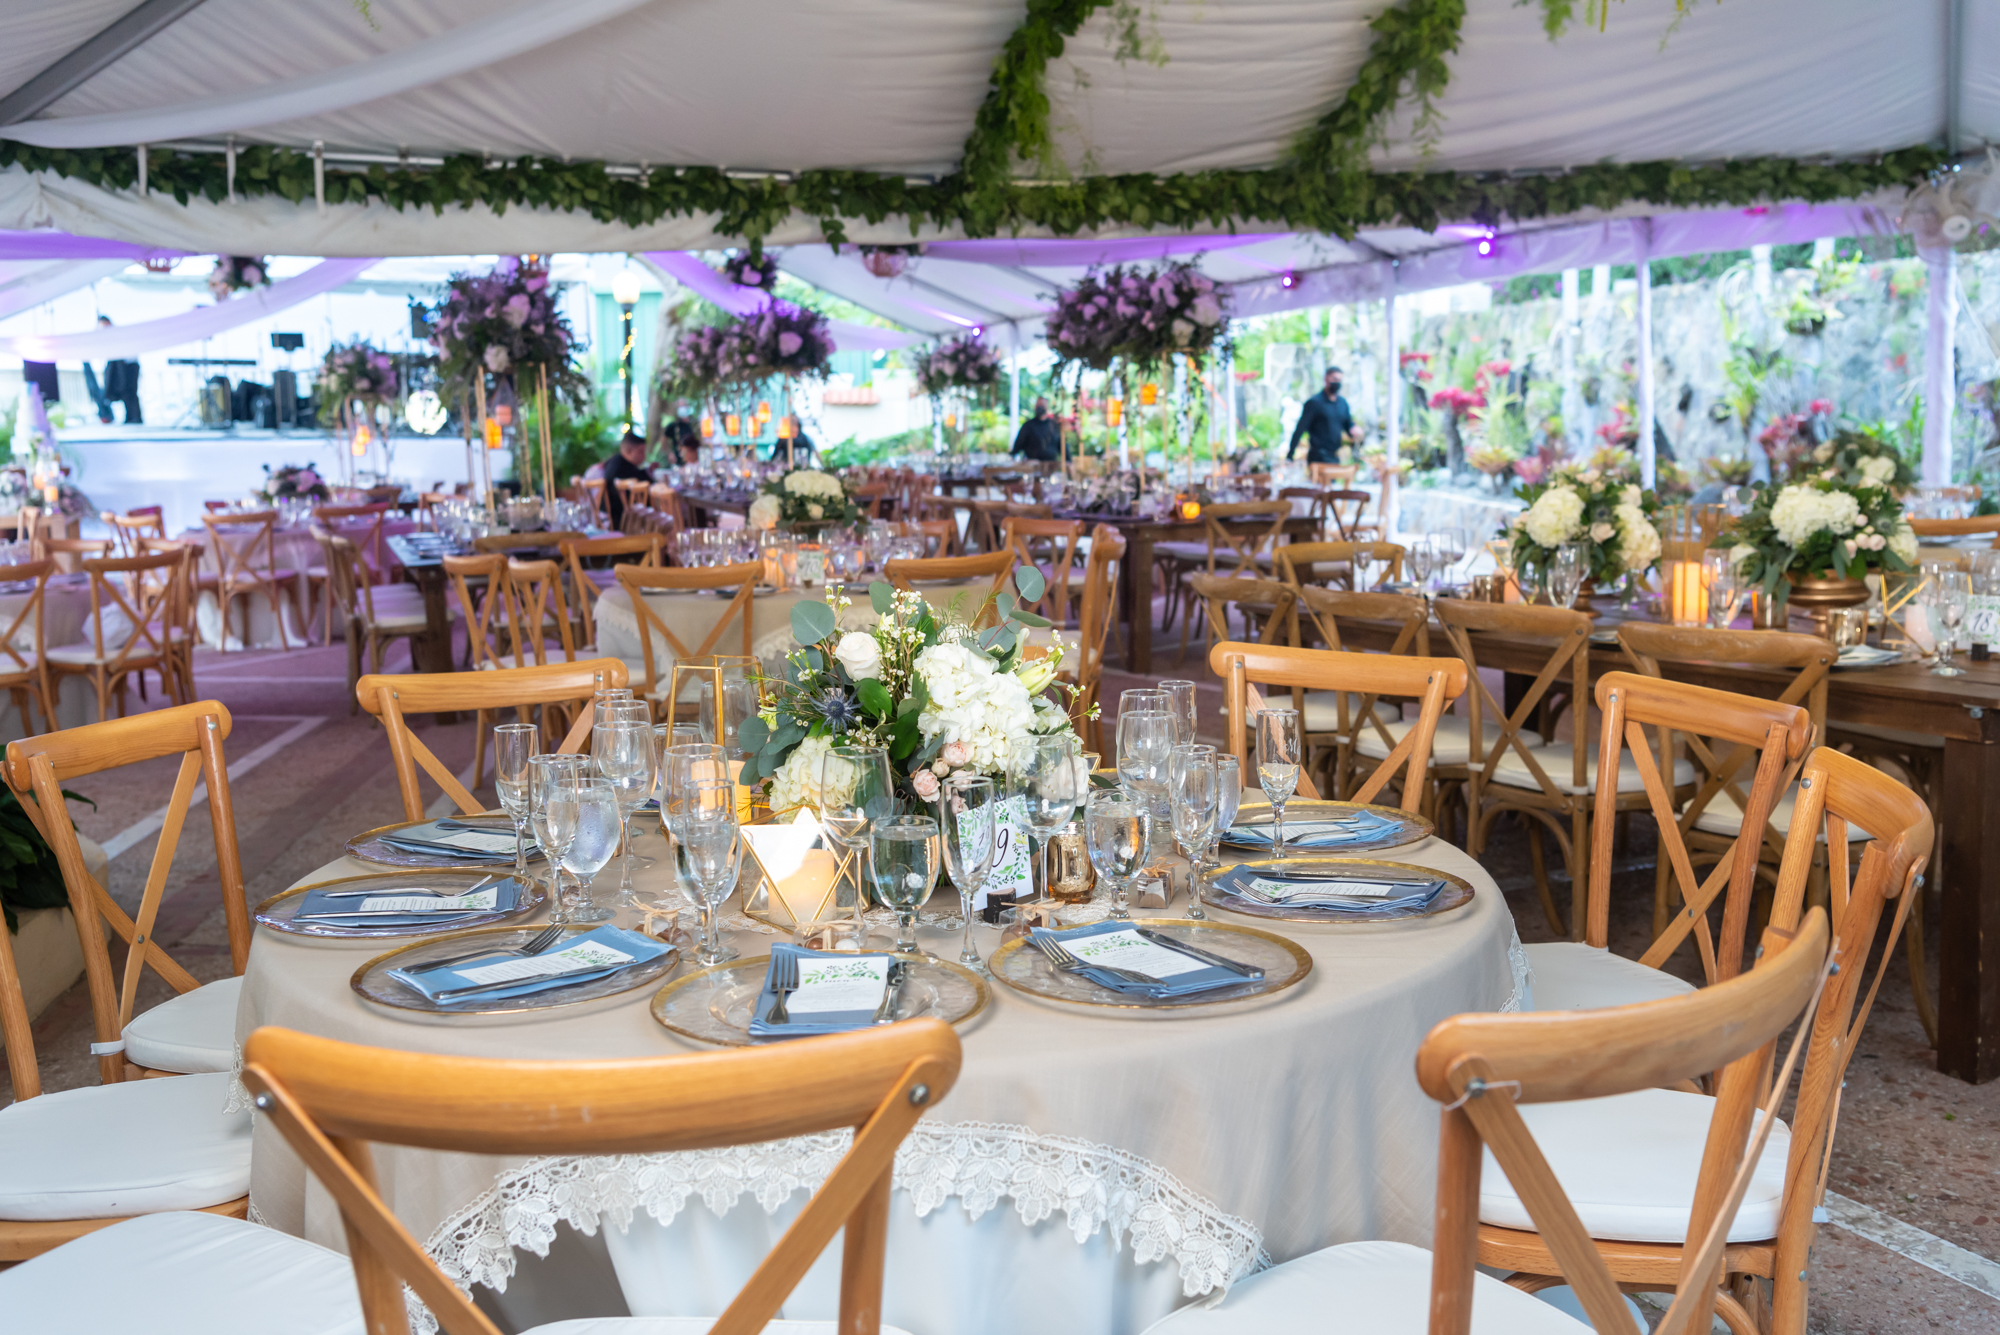 Beautiful decoration of wedding tables